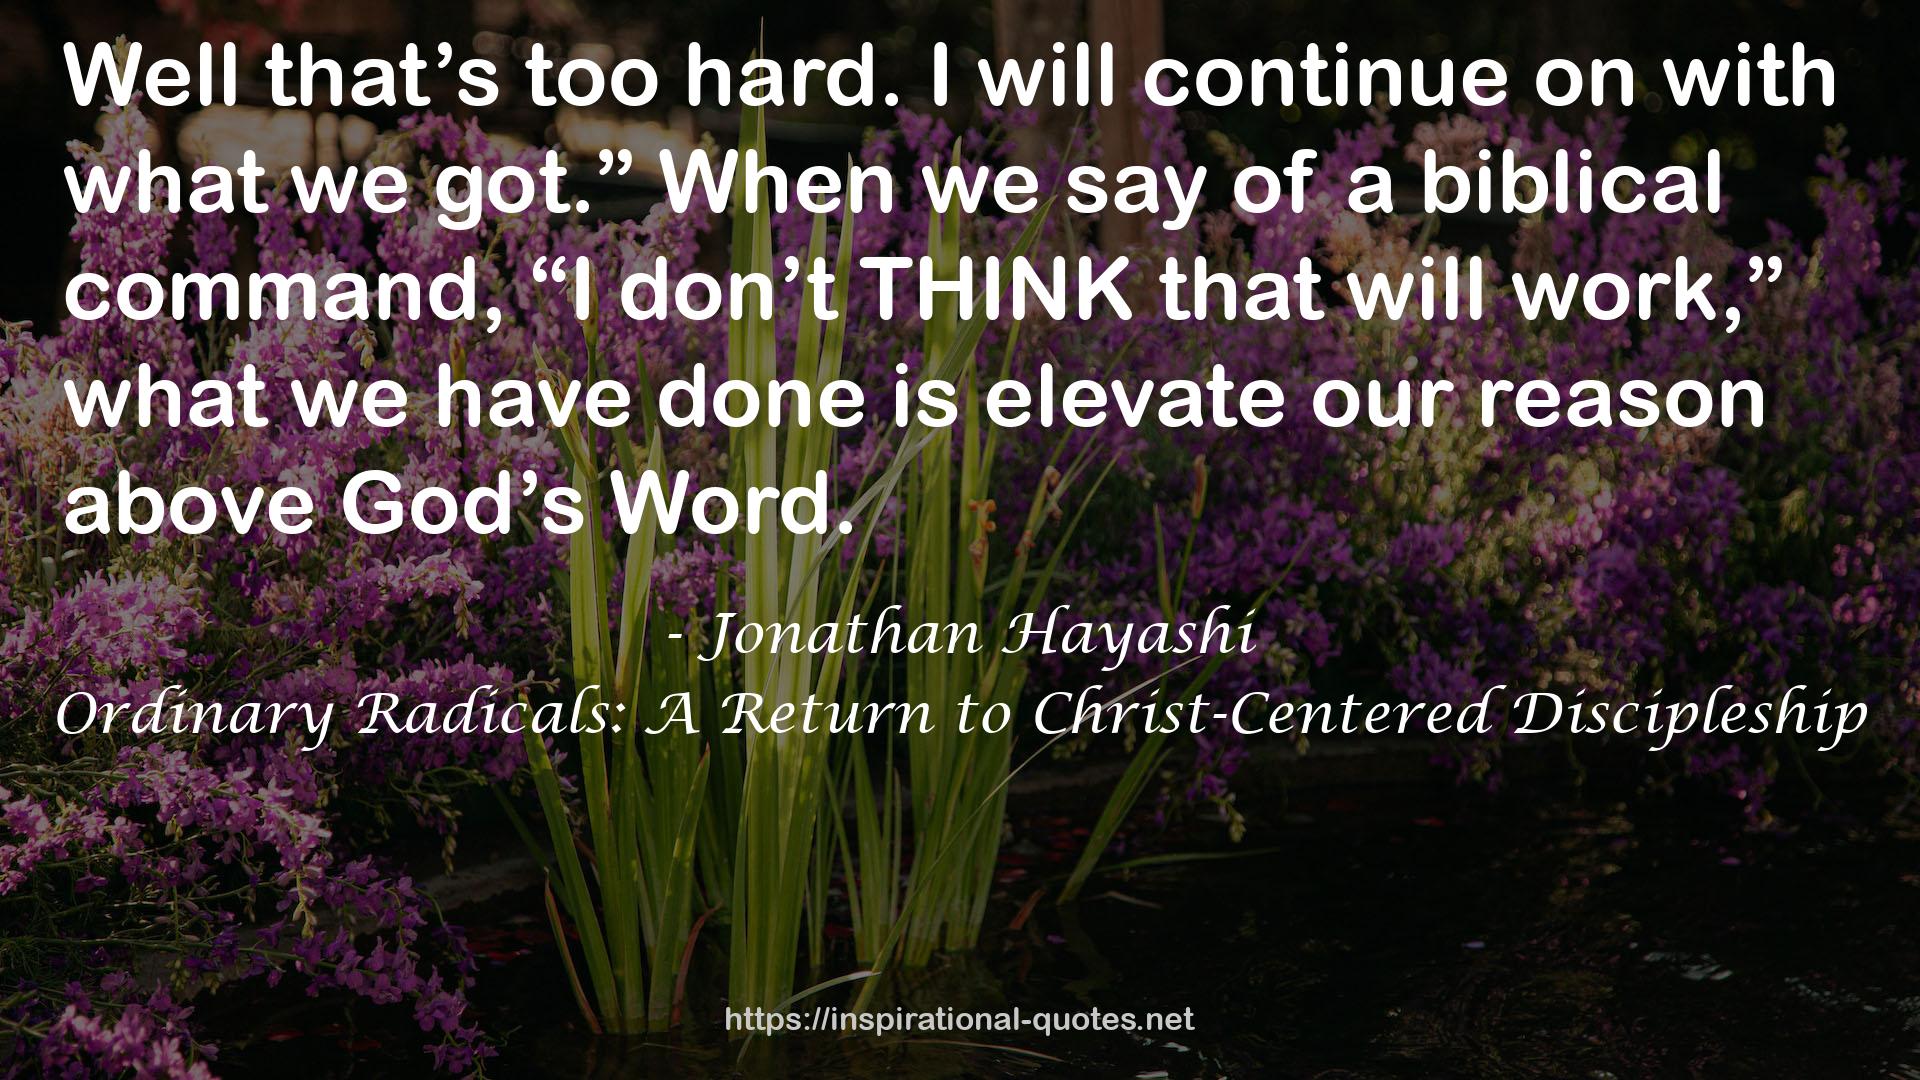 Ordinary Radicals: A Return to Christ-Centered Discipleship QUOTES